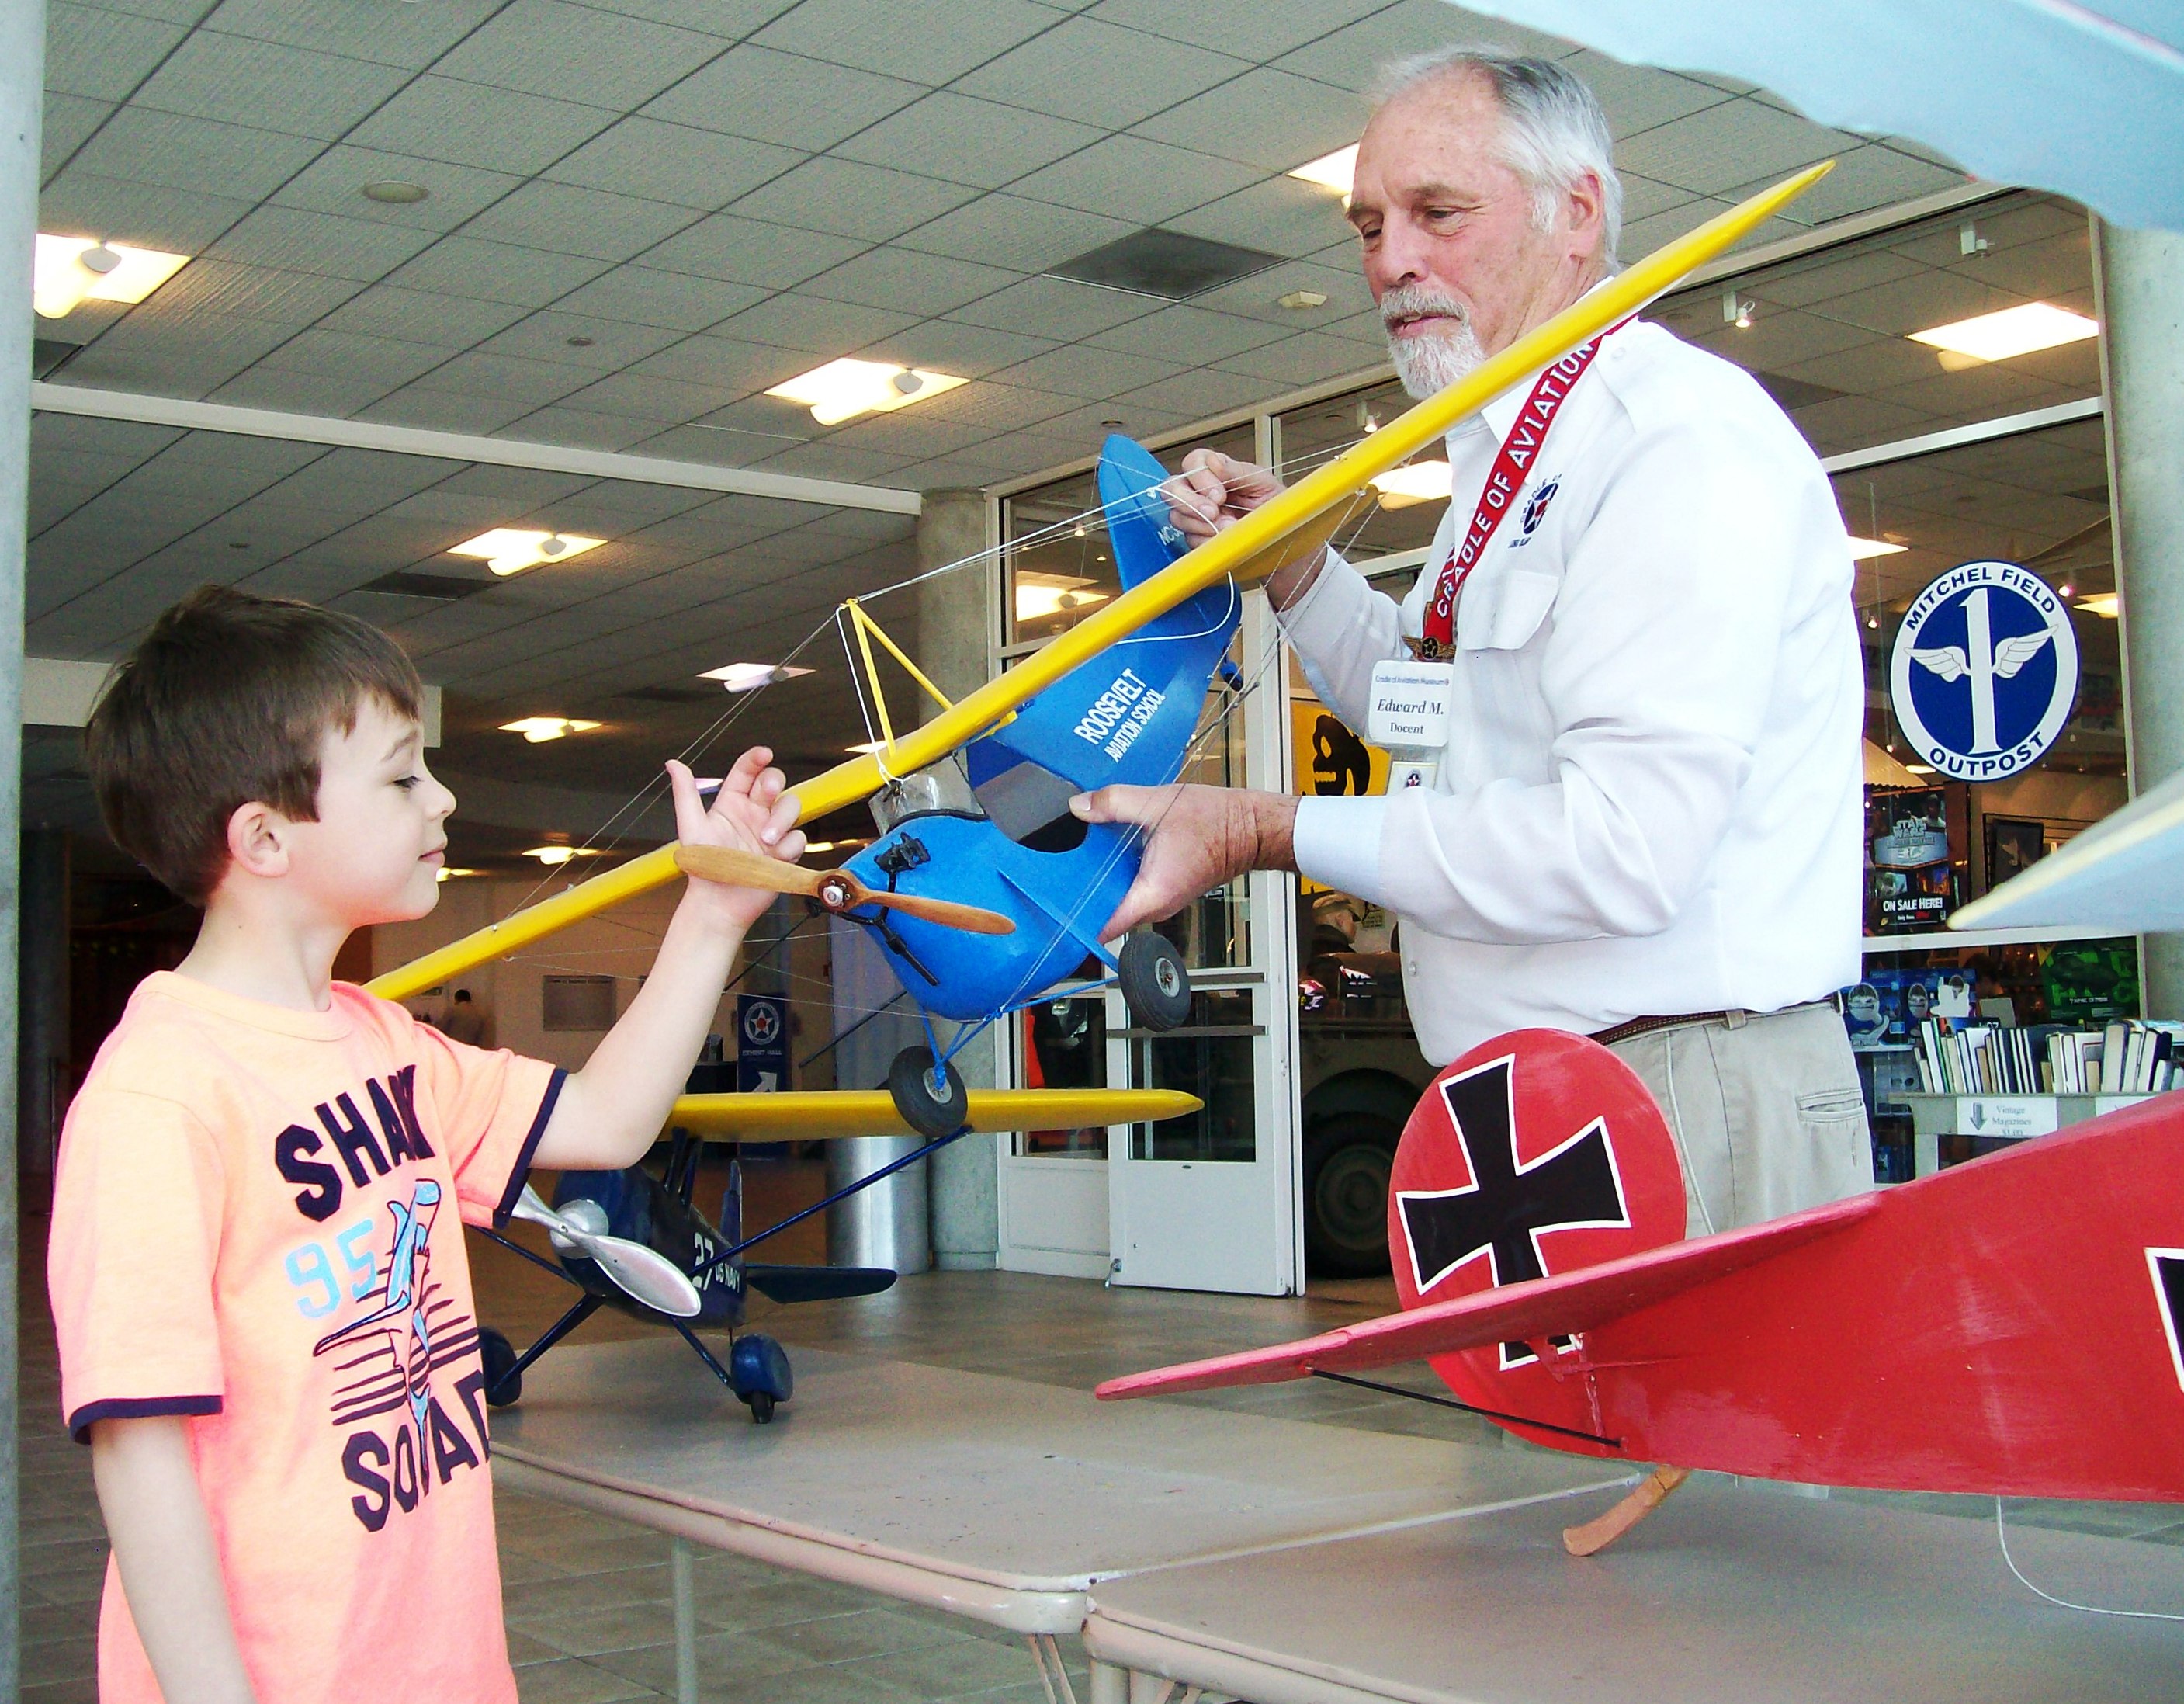 Matthew R. checks out the prop on one of the many Model Airplanes on display at the Cradle's Annual Expo